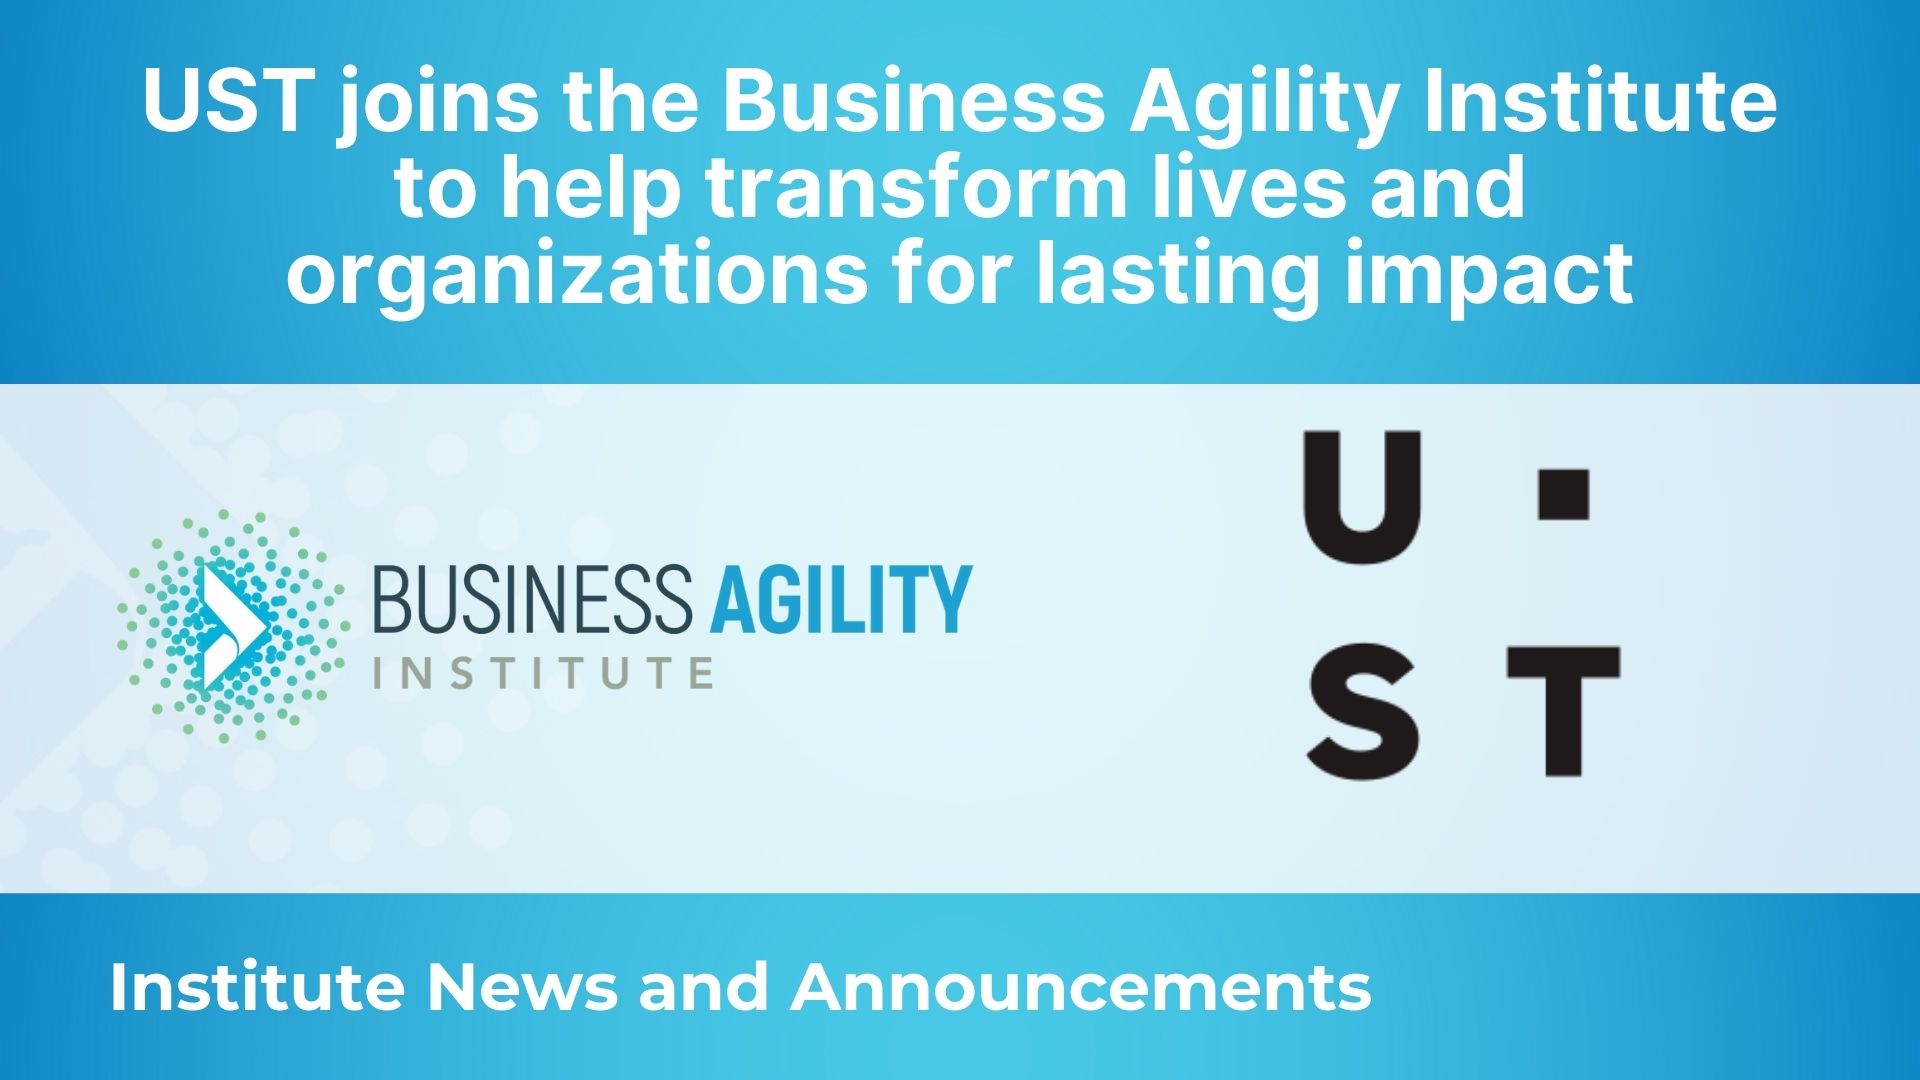 UST joins the Business Agility Institute to help transform lives and organizations for lasting impact